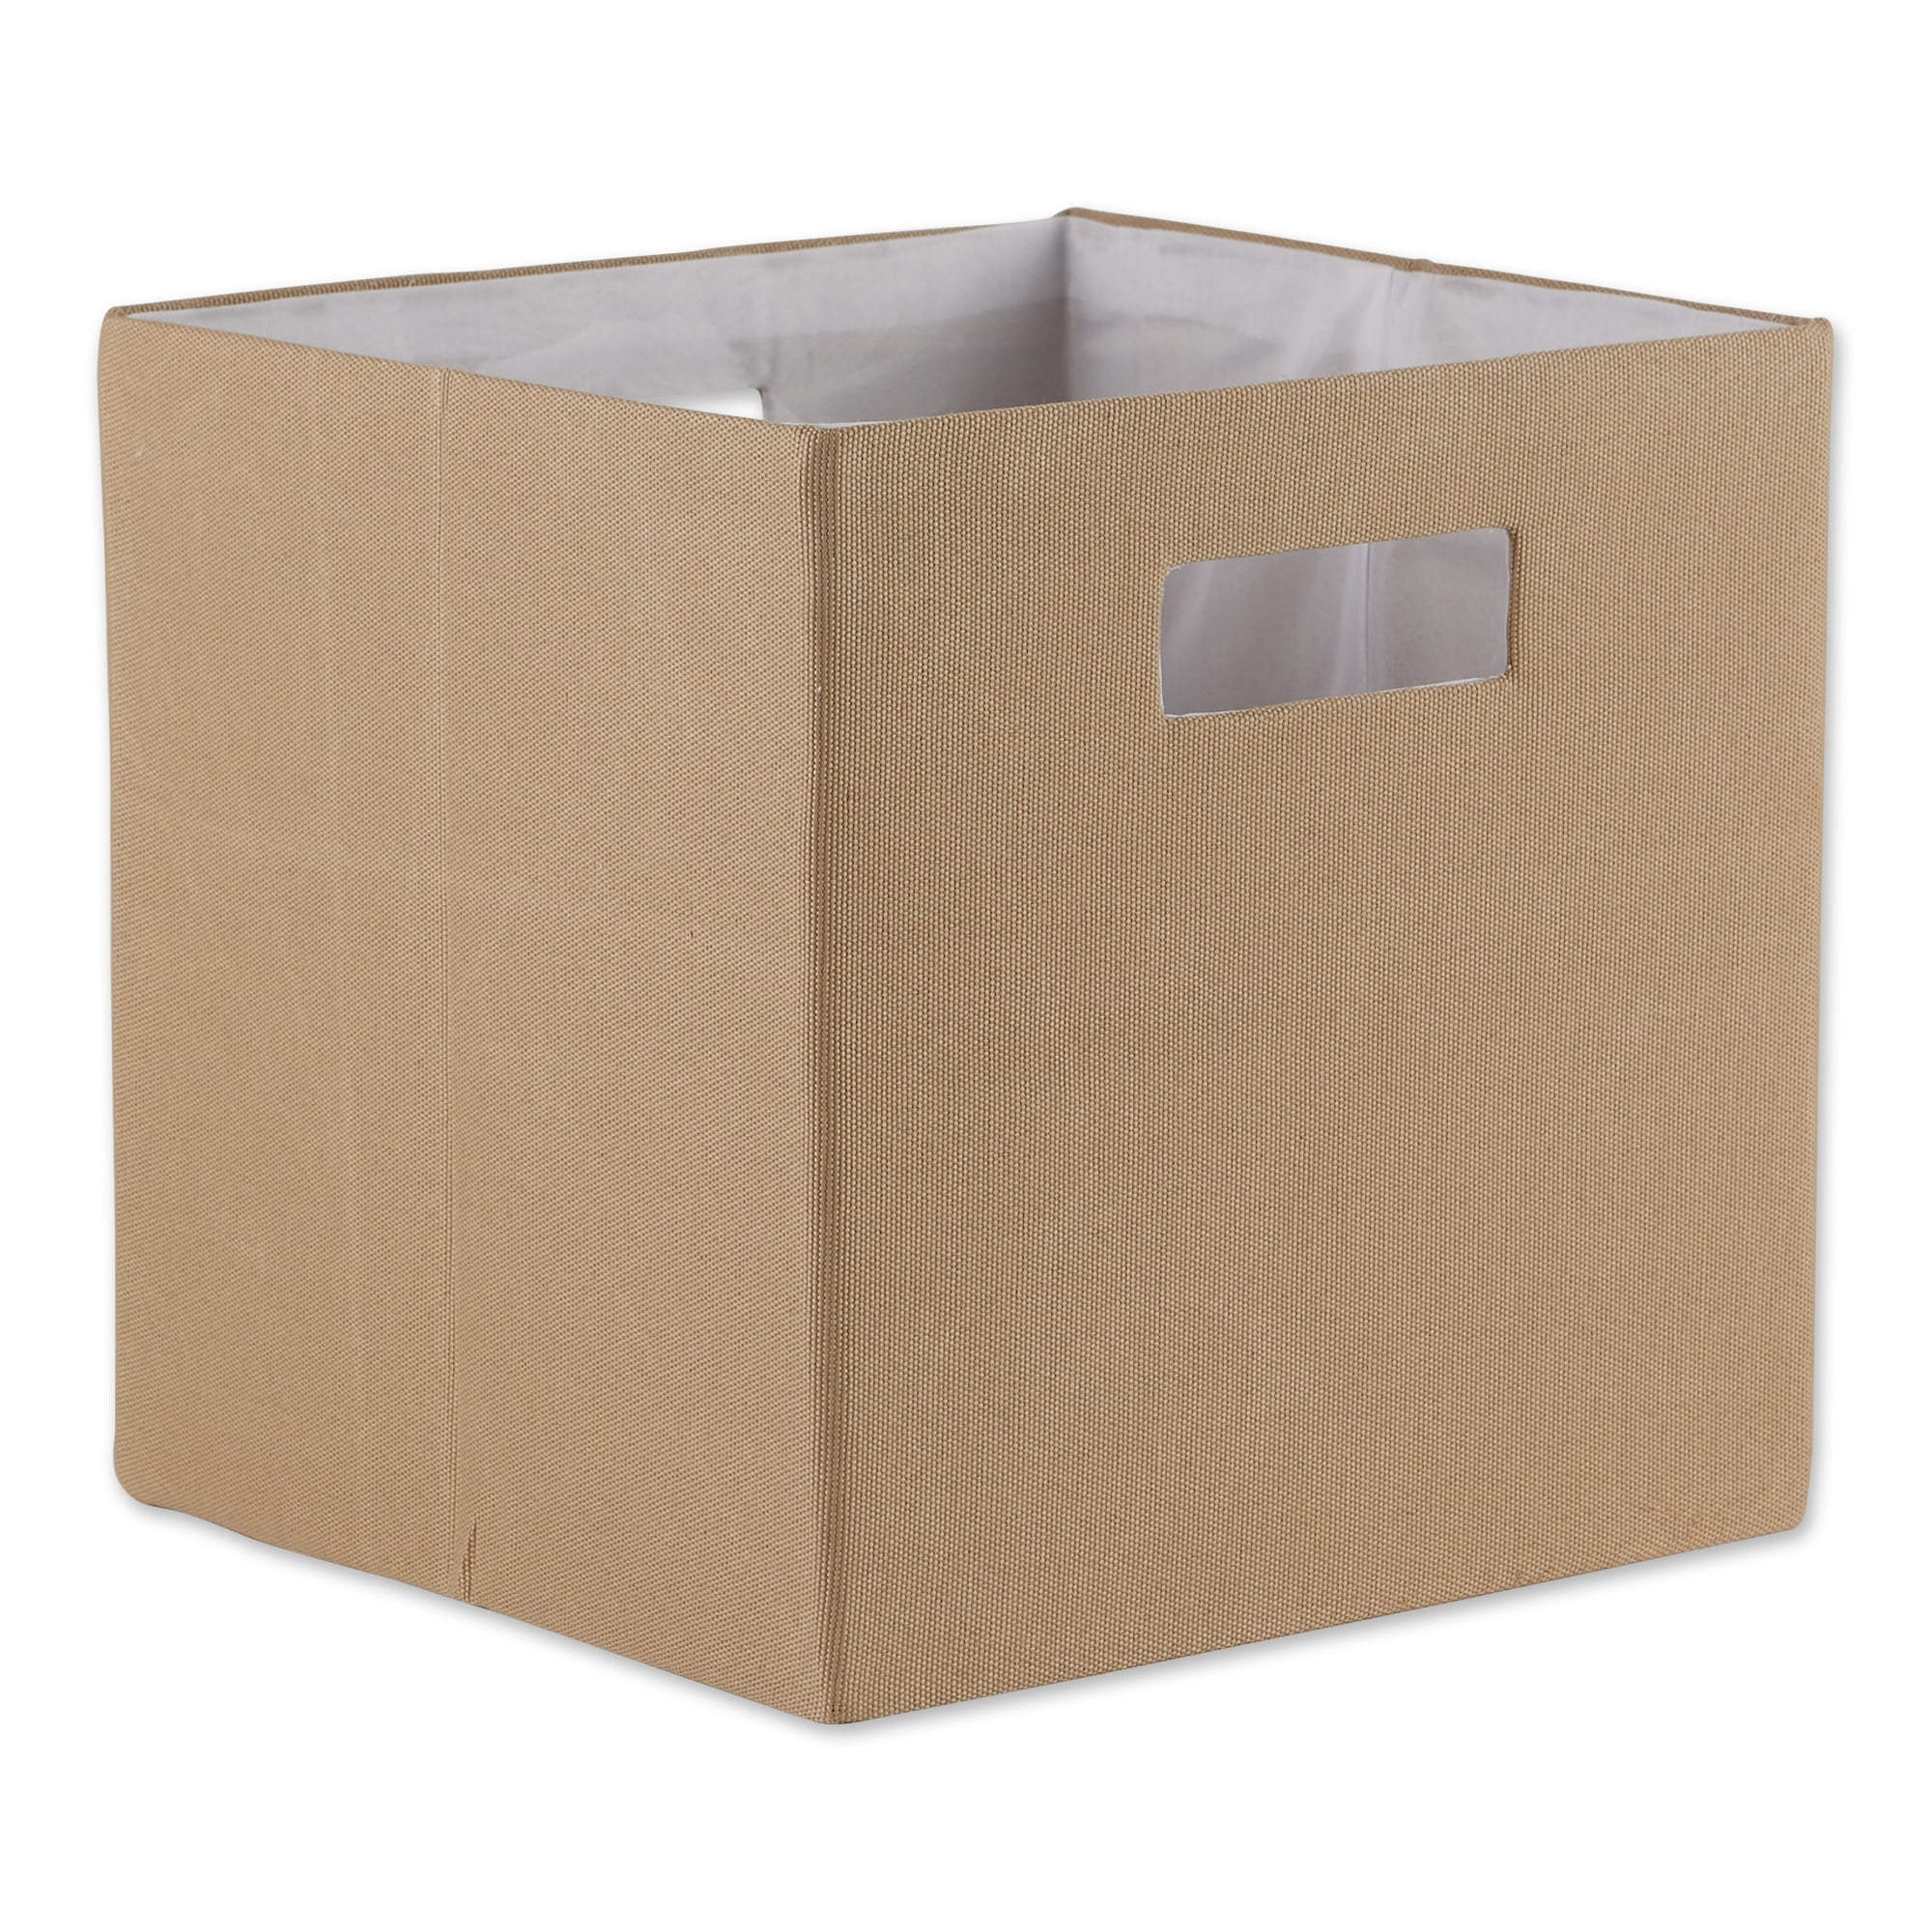 Picture of Design Imports CAMZ12915 11 x 11 x 11 in. Solid Polyester Cube Storage - Stone - Square